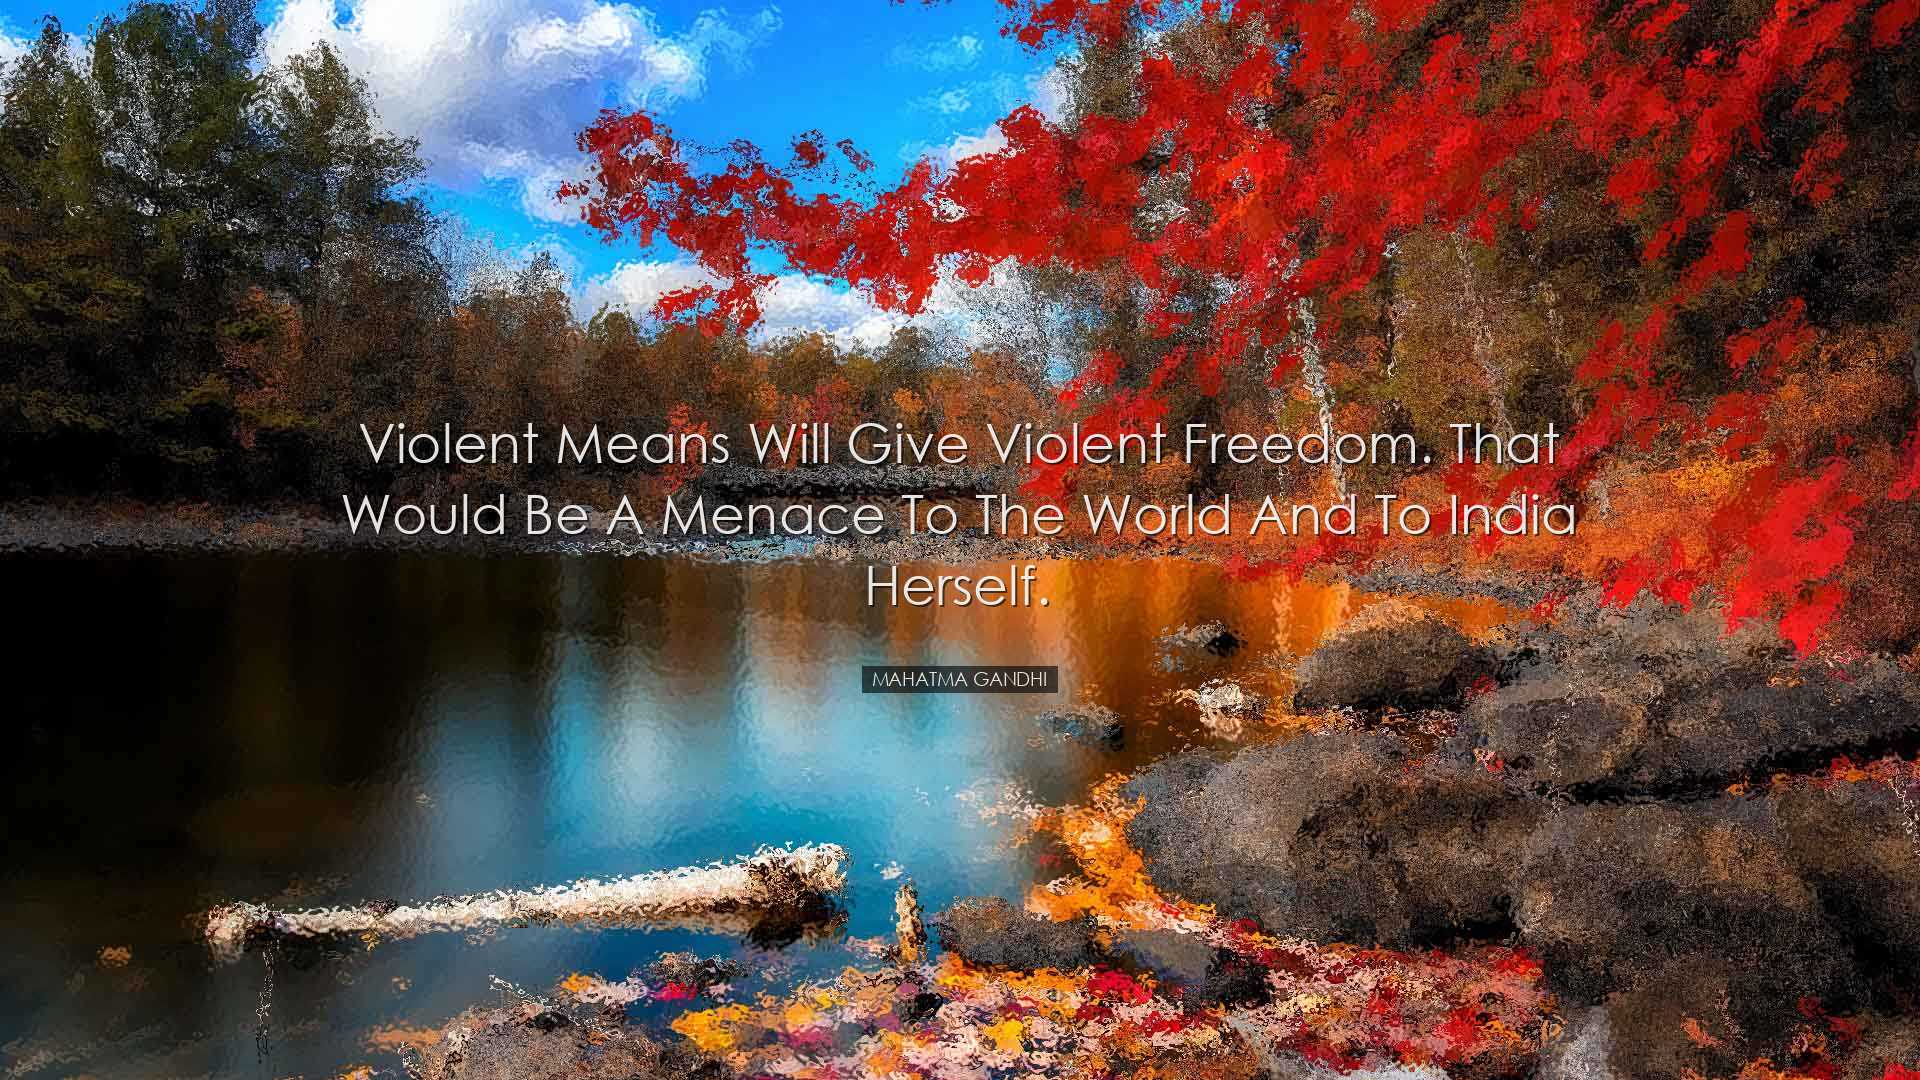 Violent means will give violent freedom. That would be a menace to